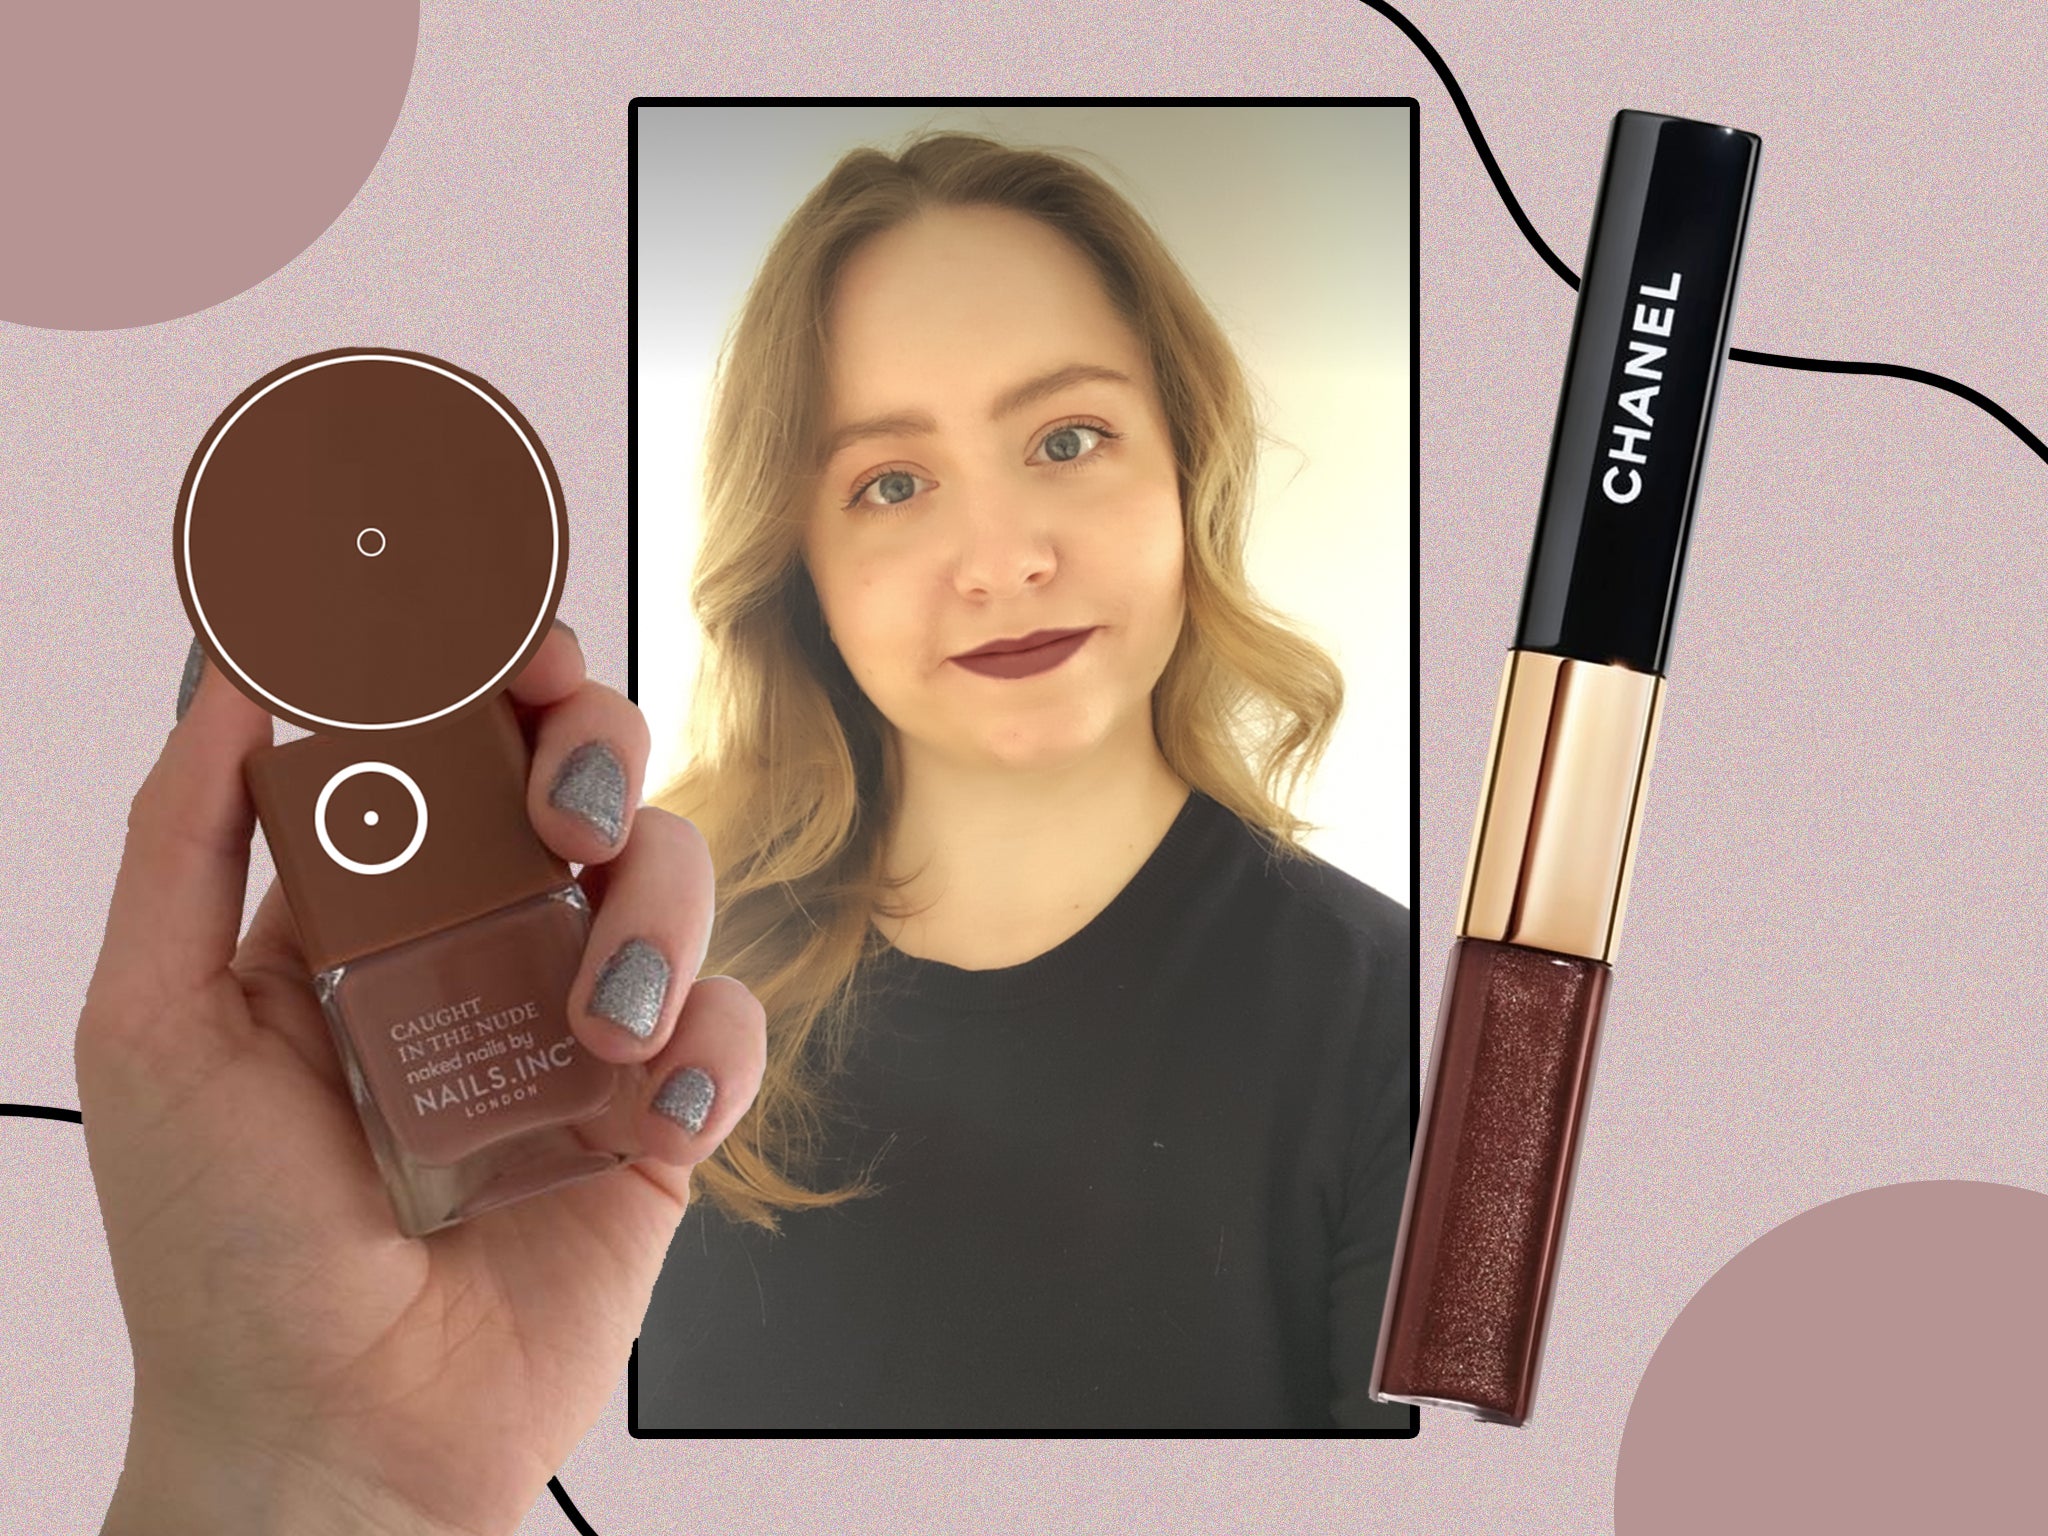 Brands including Charlotte Tilbury and Mac Cosmetics offer virtual make-up services, but Chanel has gone one step further with its colour scanner